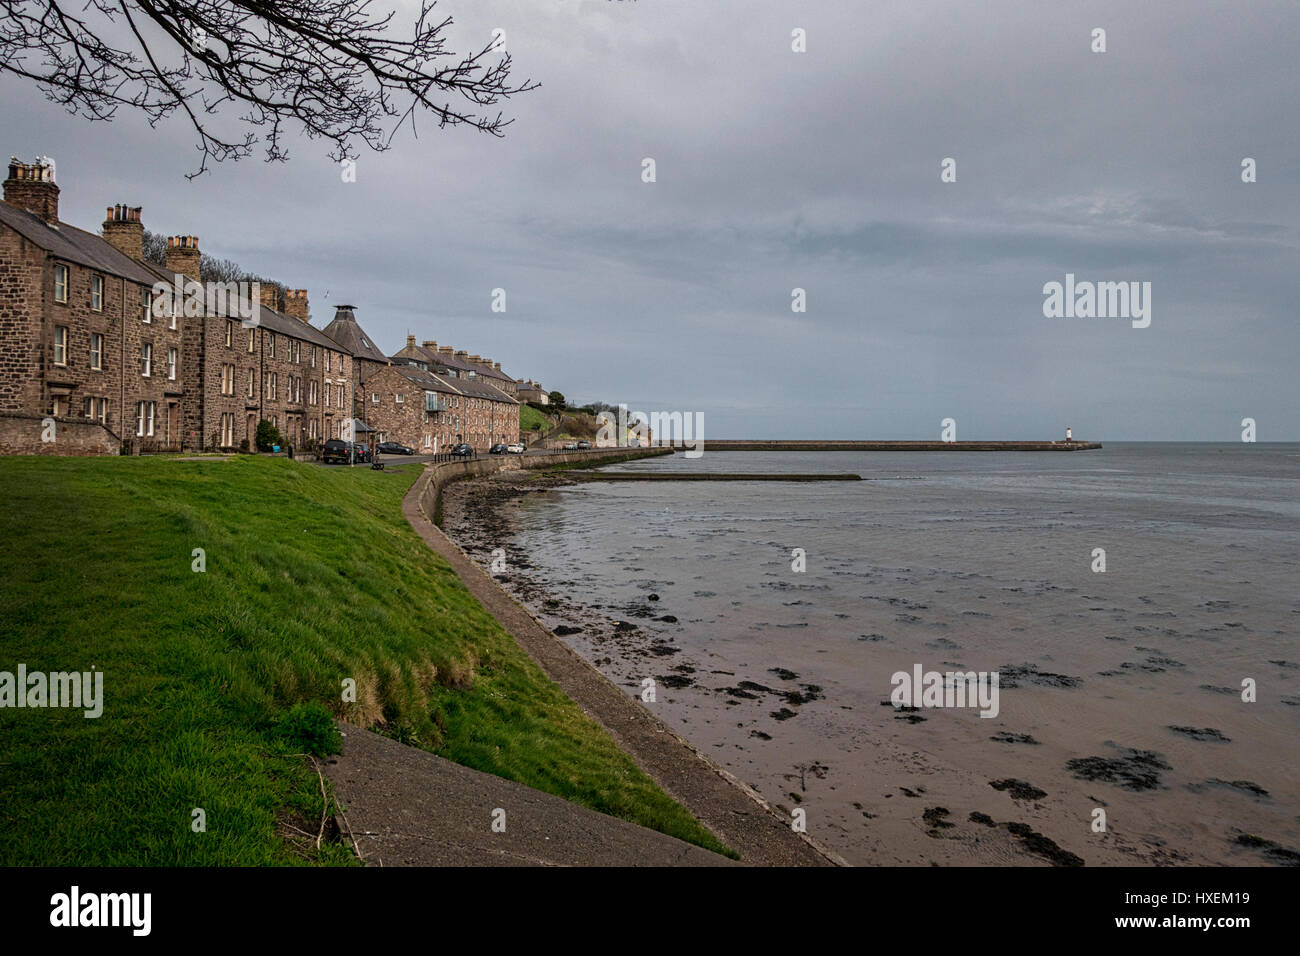 The pier and lighthouse made famous by painter L S Lowry at Berwick-upon-Tweed, Northumberland, England Stock Photo